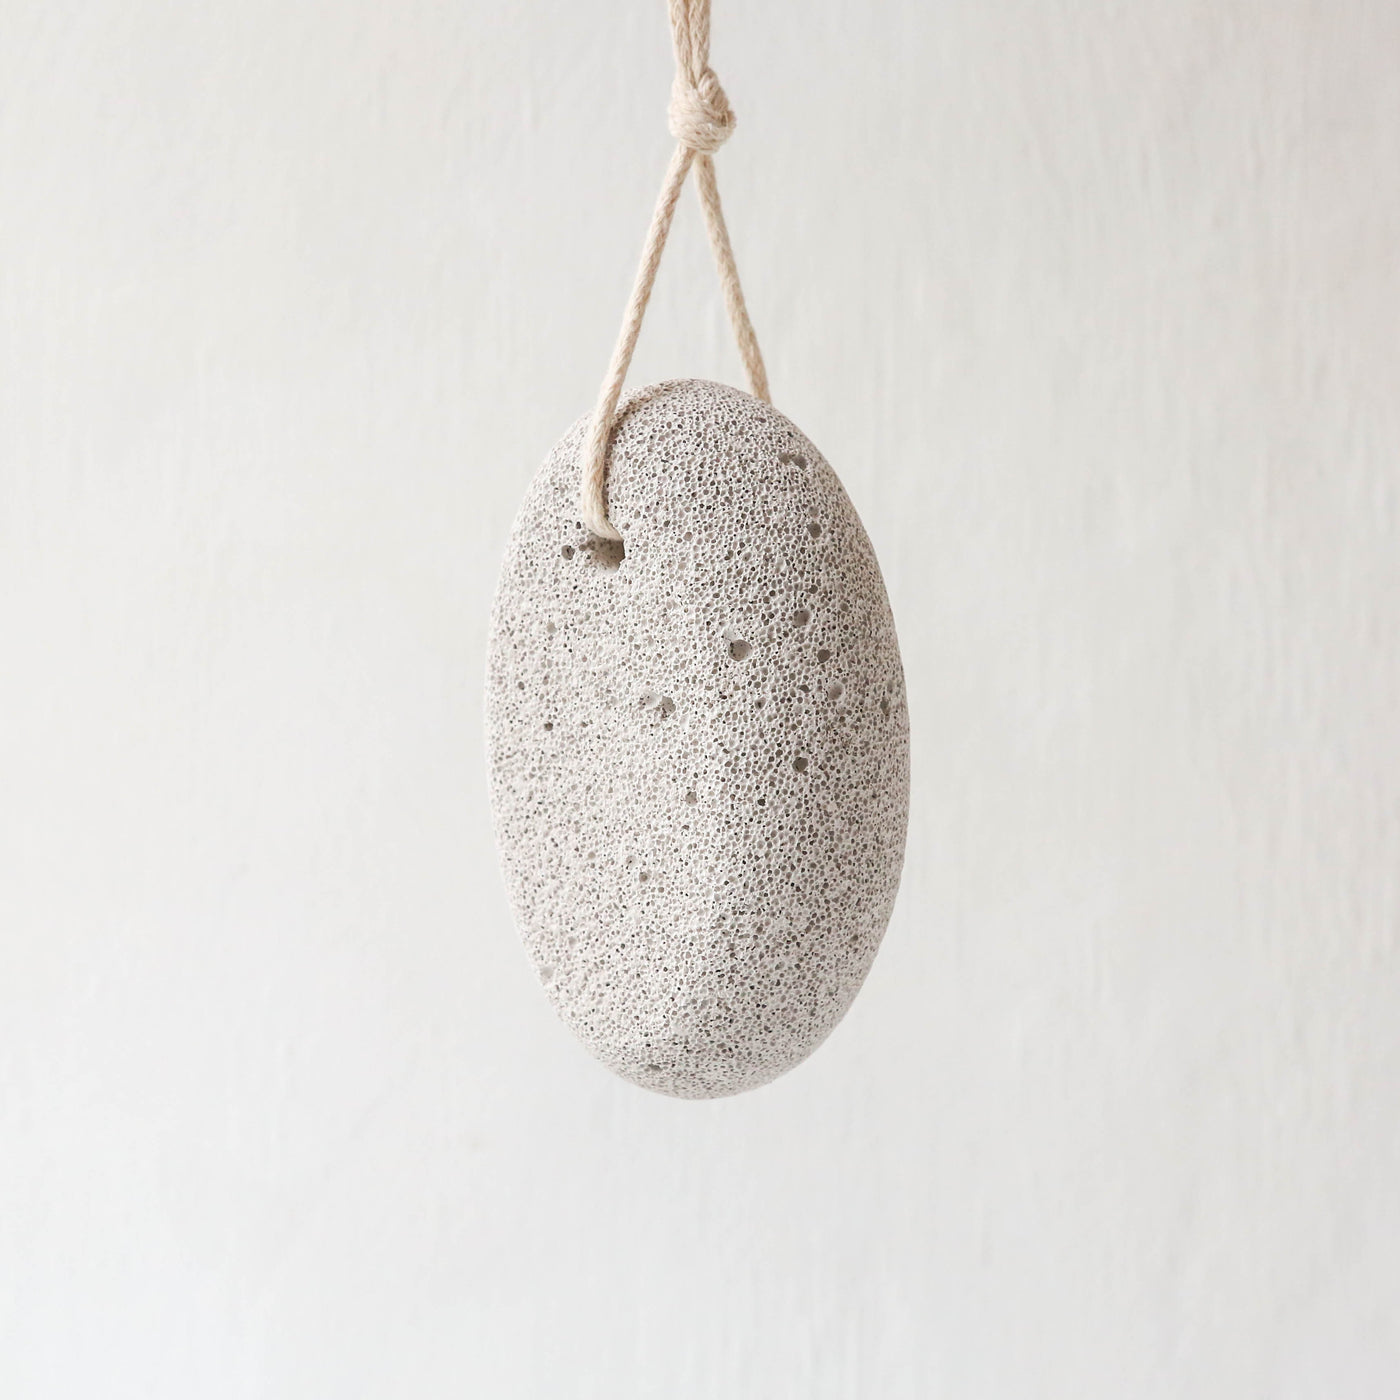 Pumice Stone With Rope